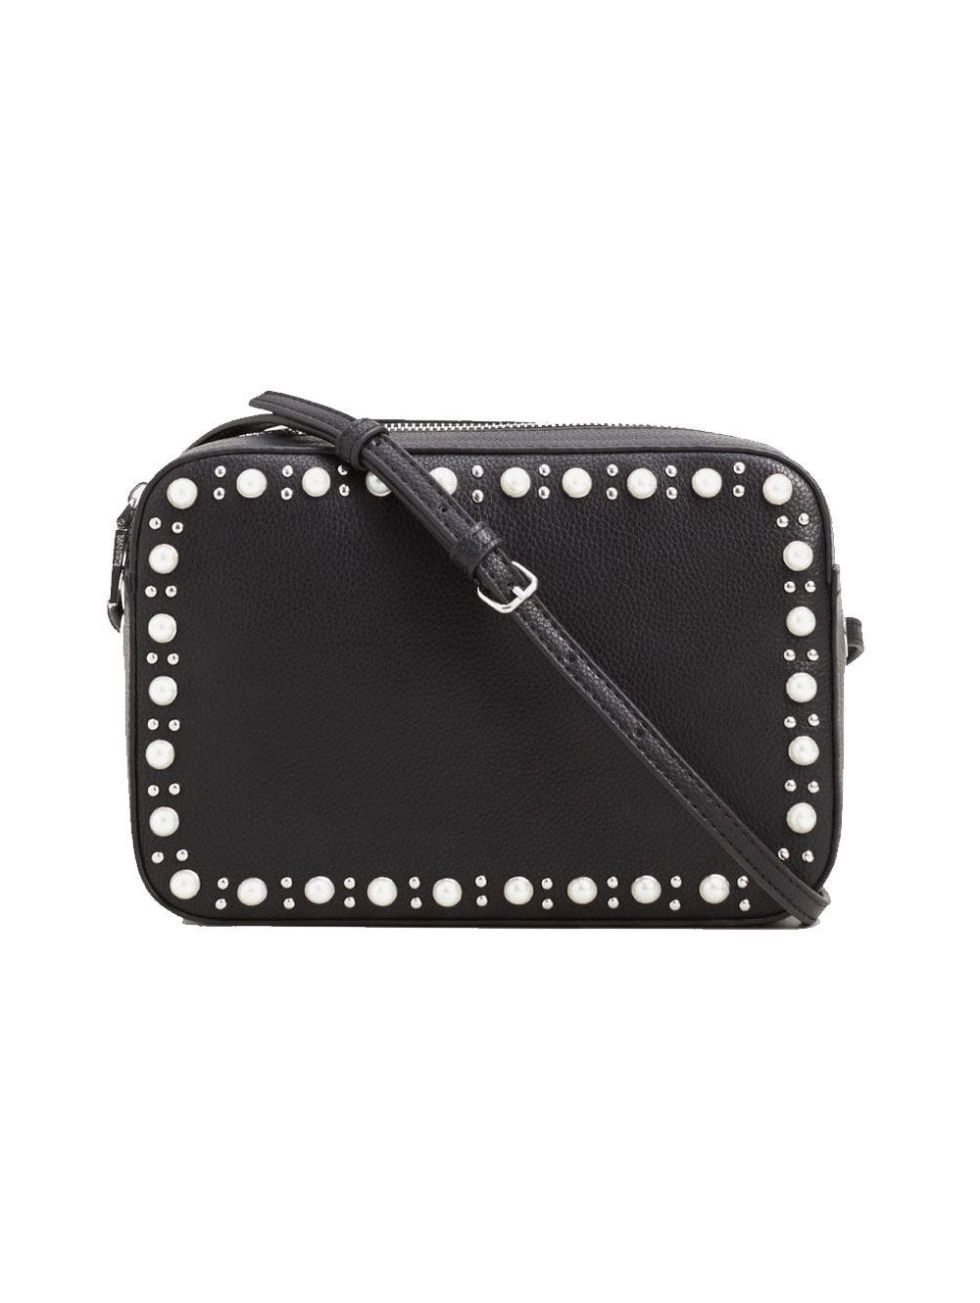 Product, Pattern, Black, Rectangle, Leather, Square, Shoulder bag, Chain, 